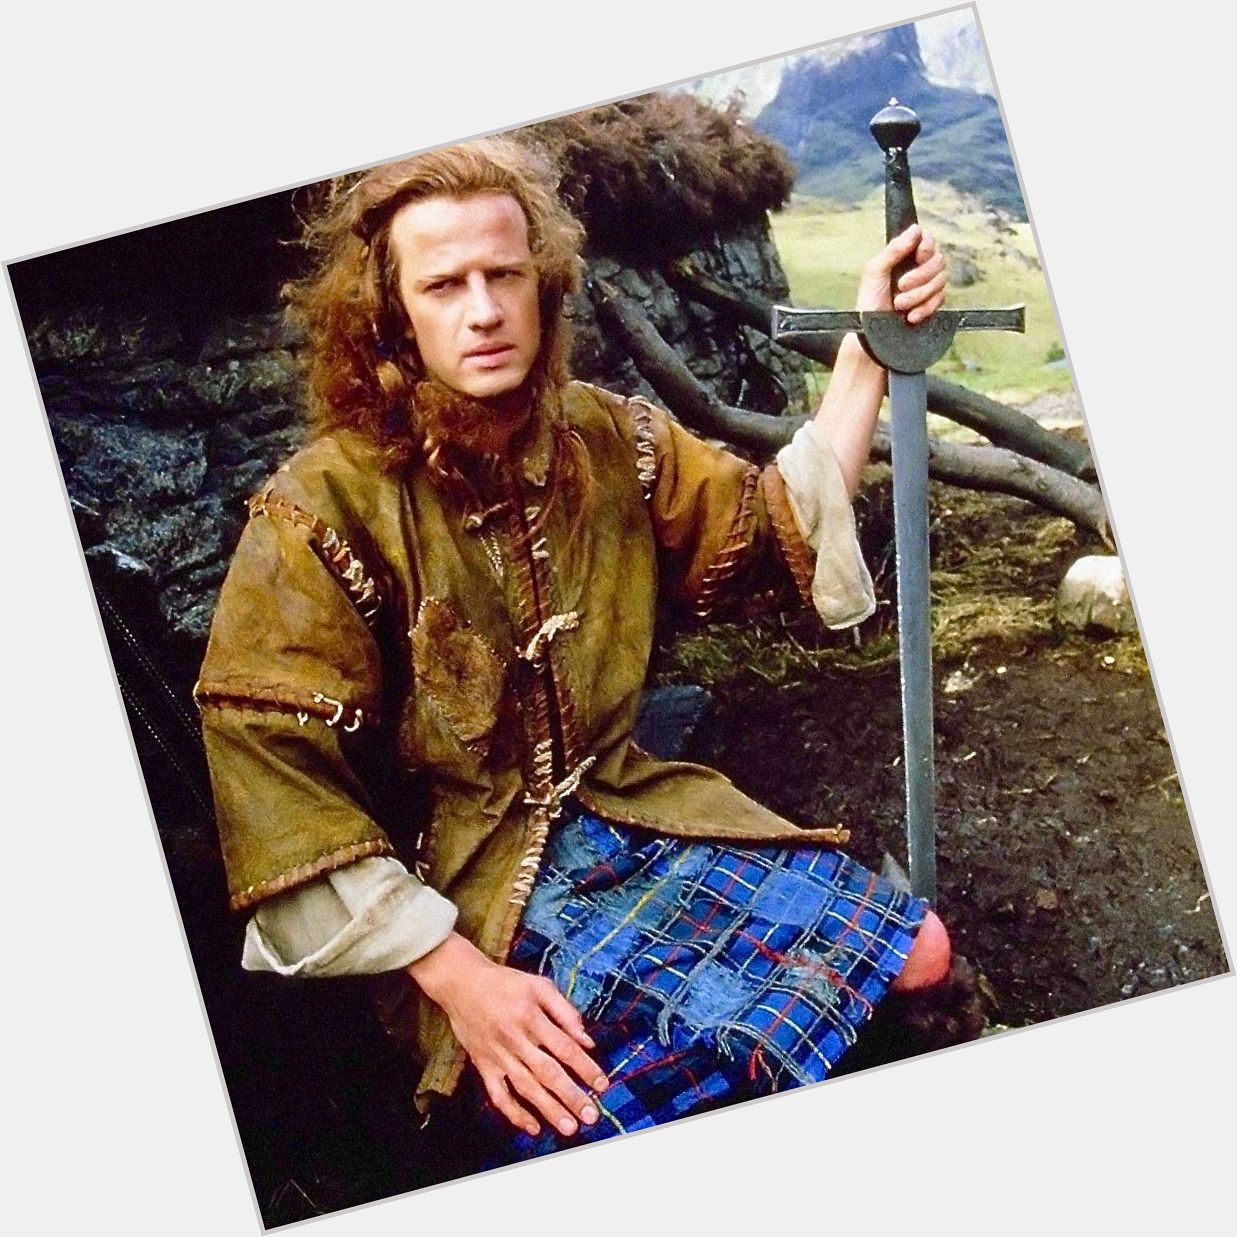 There can be only one Christopher Lambert birthday post.

Happy 62nd birthday to the HIGHLANDER star. 